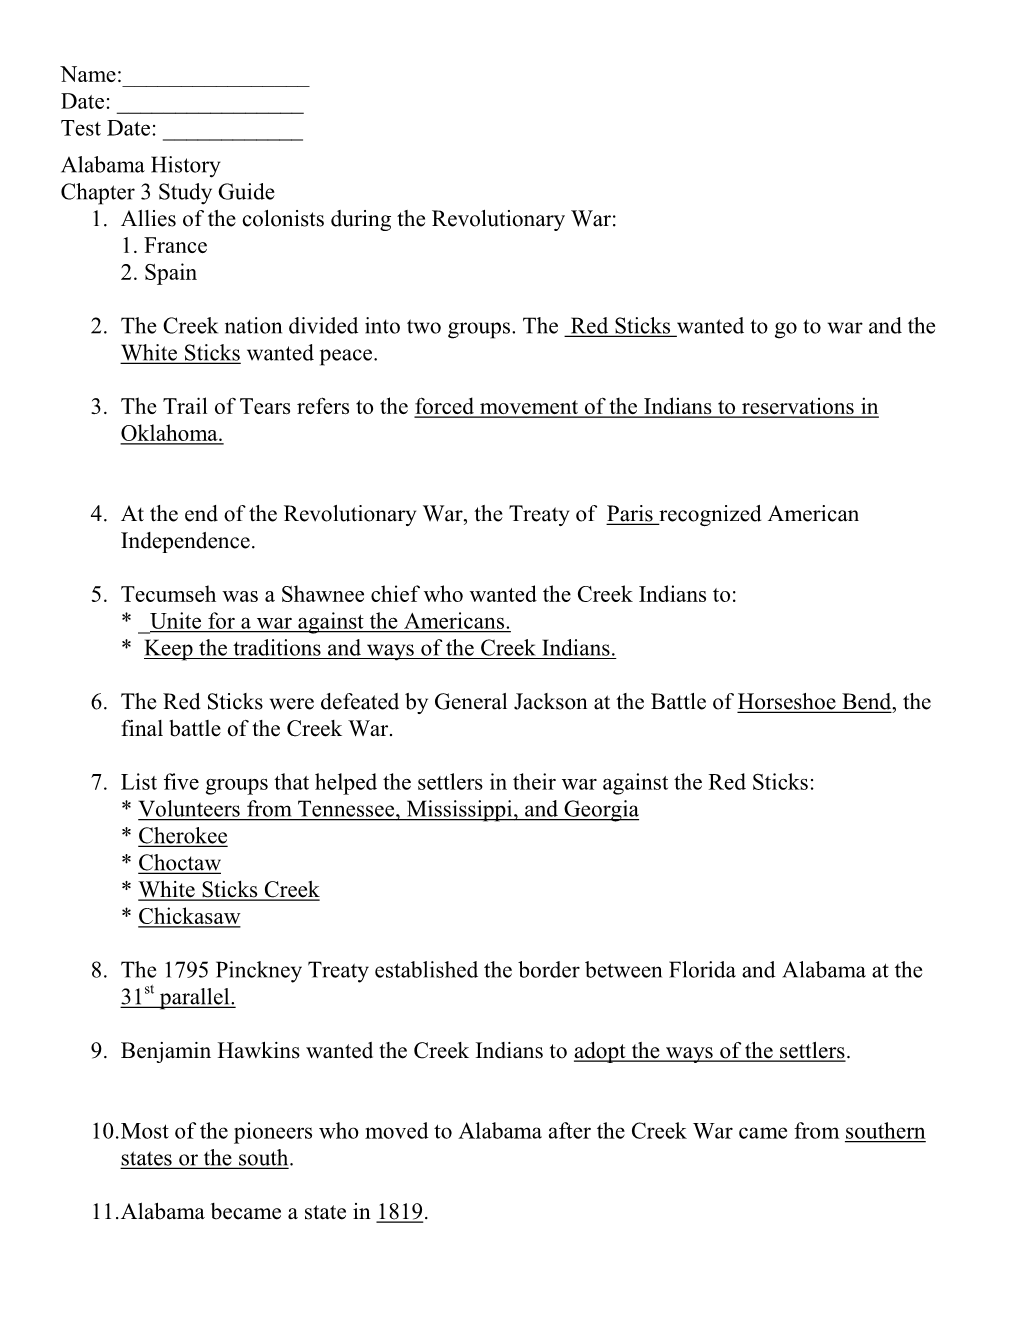 Alabama History Chapter 3 Study Guide 1